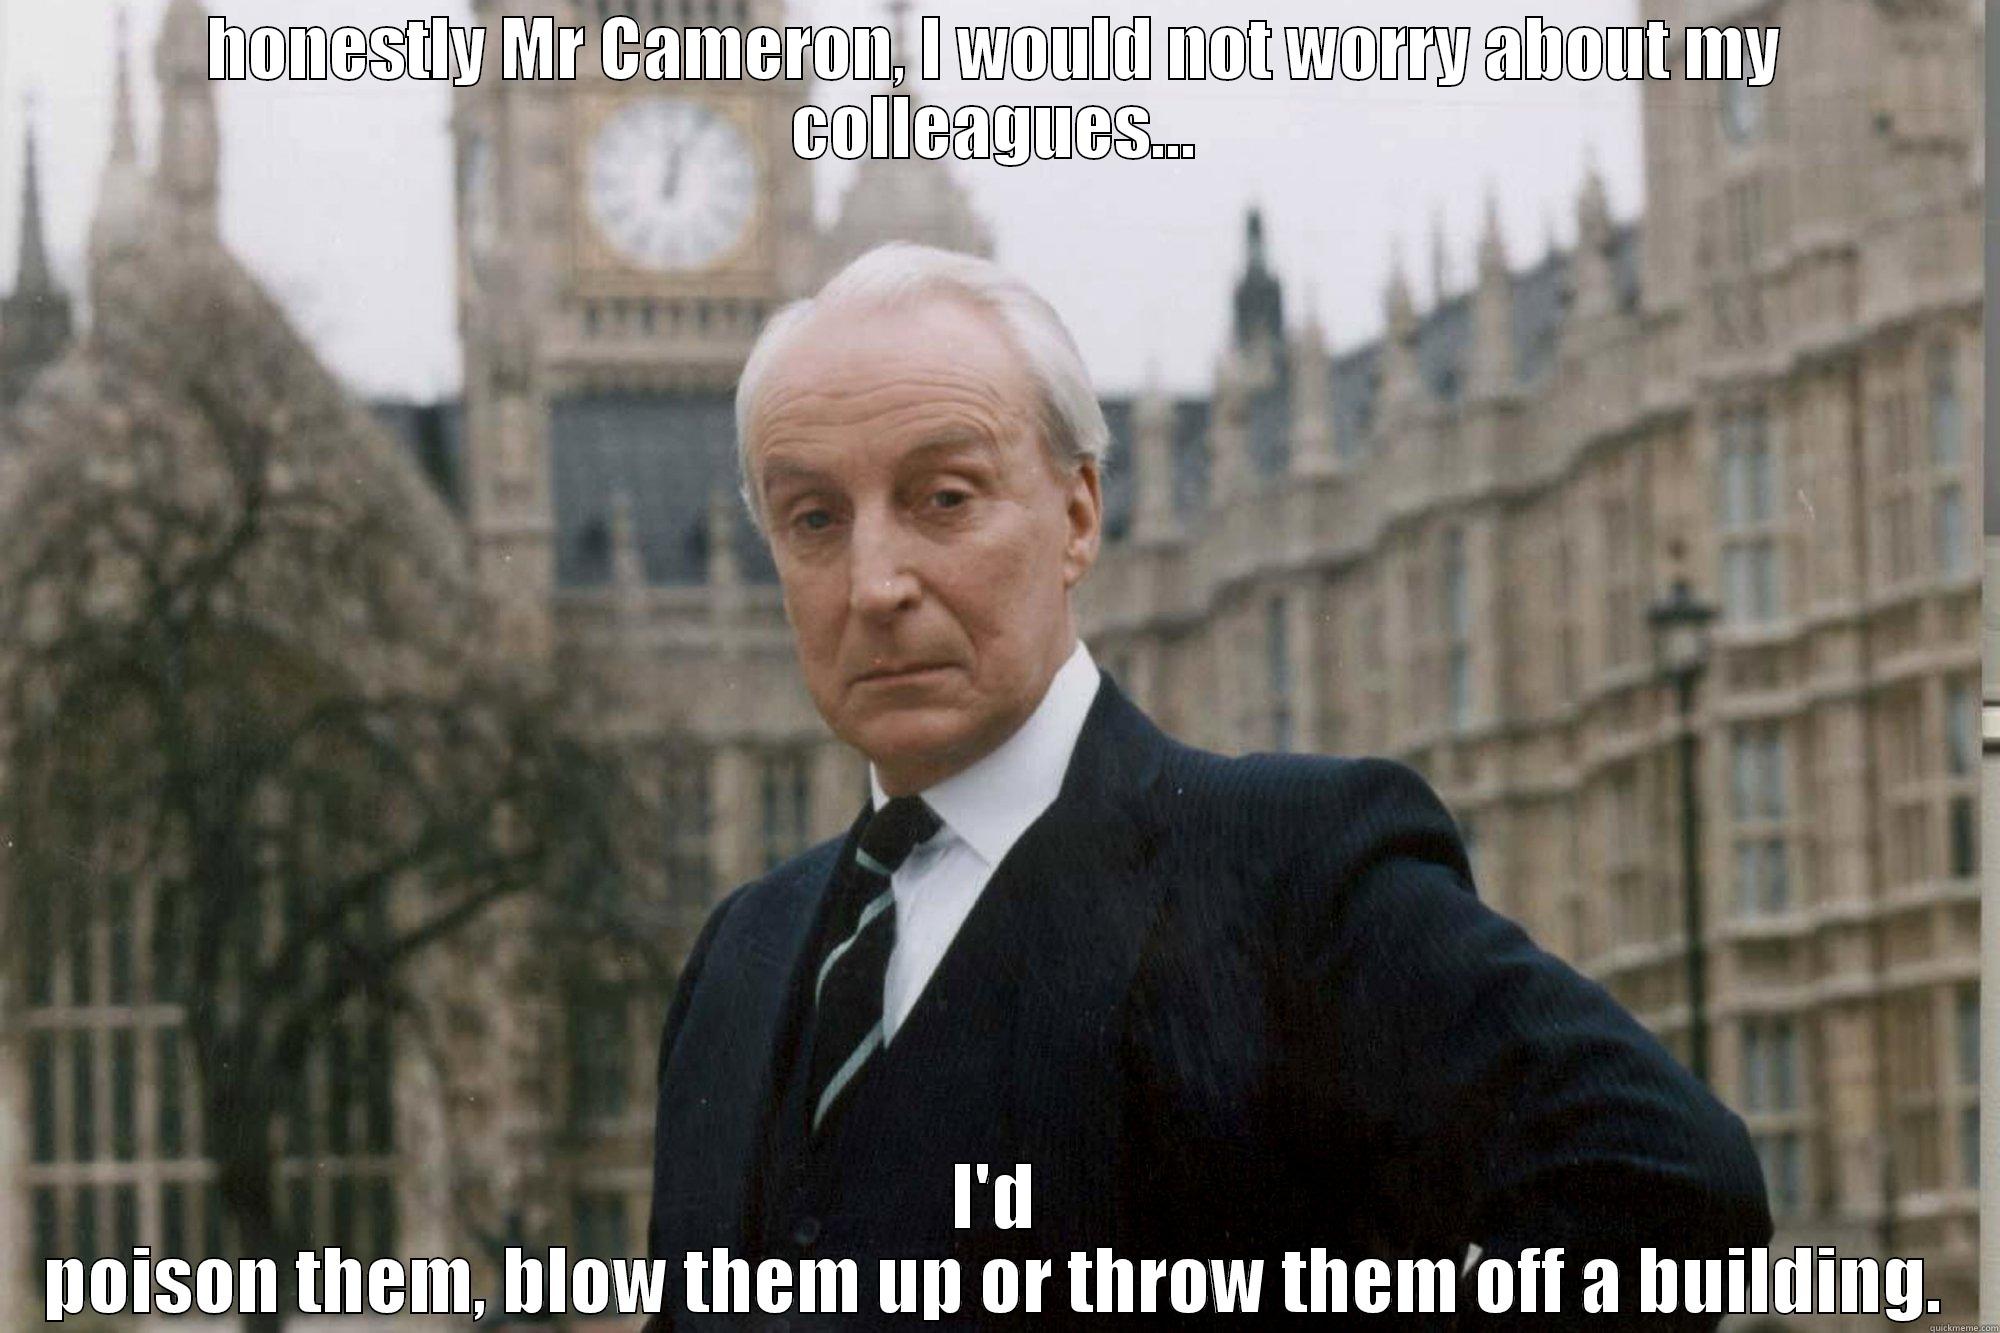 HONESTLY MR CAMERON, I WOULD NOT WORRY ABOUT MY COLLEAGUES... I'D POISON THEM, BLOW THEM UP OR THROW THEM OFF A BUILDING. Misc